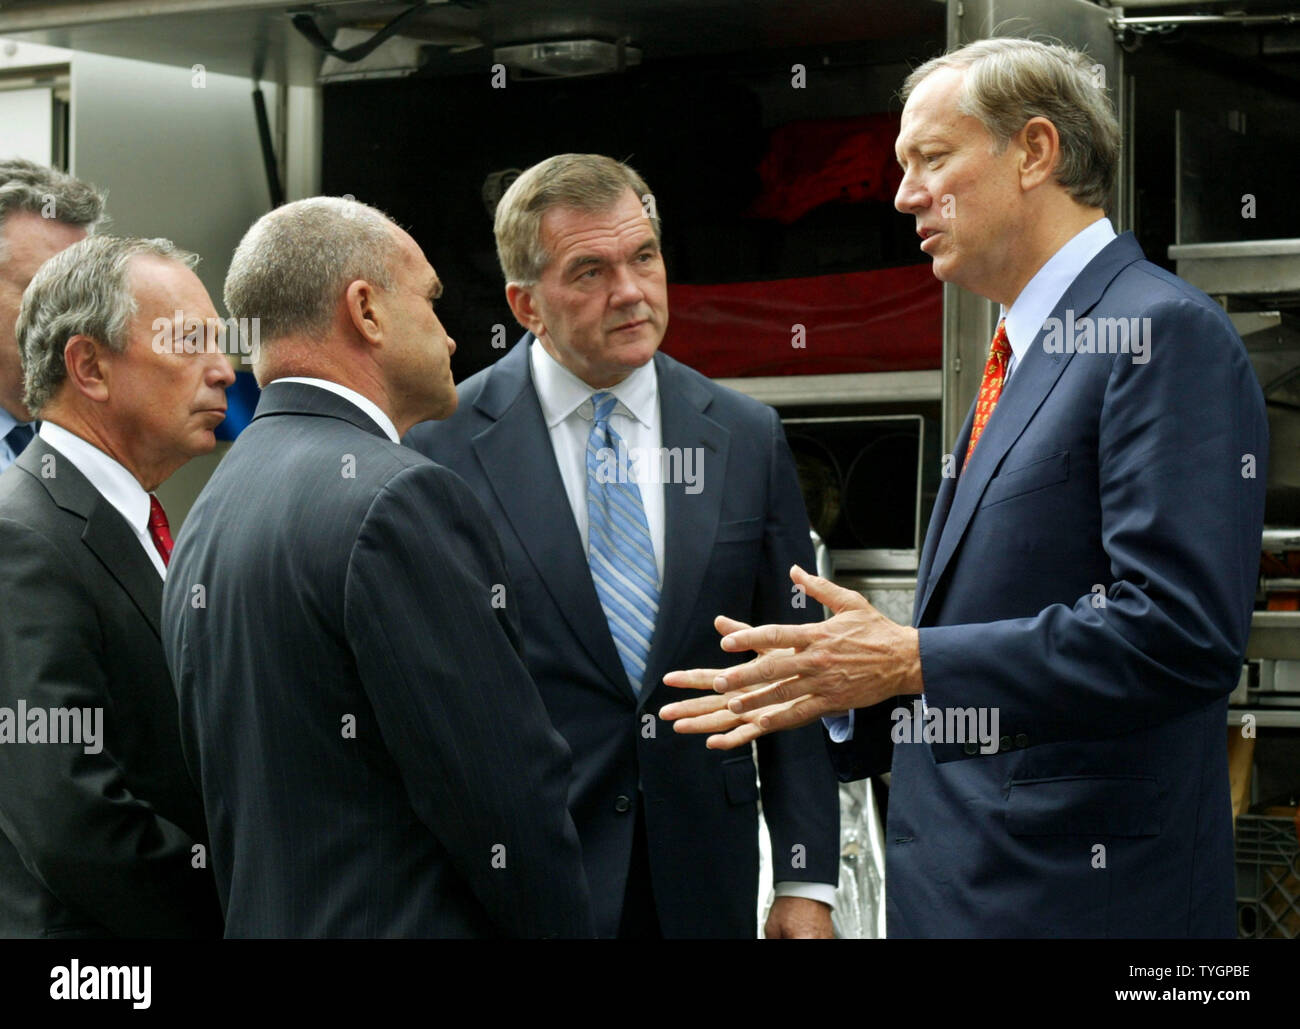 New York State governor George Pataki (R) talks with New York City mayor Michael Bloomberg (L), police commissioner Raymond Kelly (2nd L), and Secretary of Homeland Security Tom Ridge as they check out some of the security vehicles and apparatus at the New York City Police Department's headquarters August 25, 2004 in New York City. Ridge is on hand to discuss security measures with city officials in preparation for the Republican National Convention and the demonstrators it will attract to the city. (UPI Photo/Monika Graff) Stock Photo